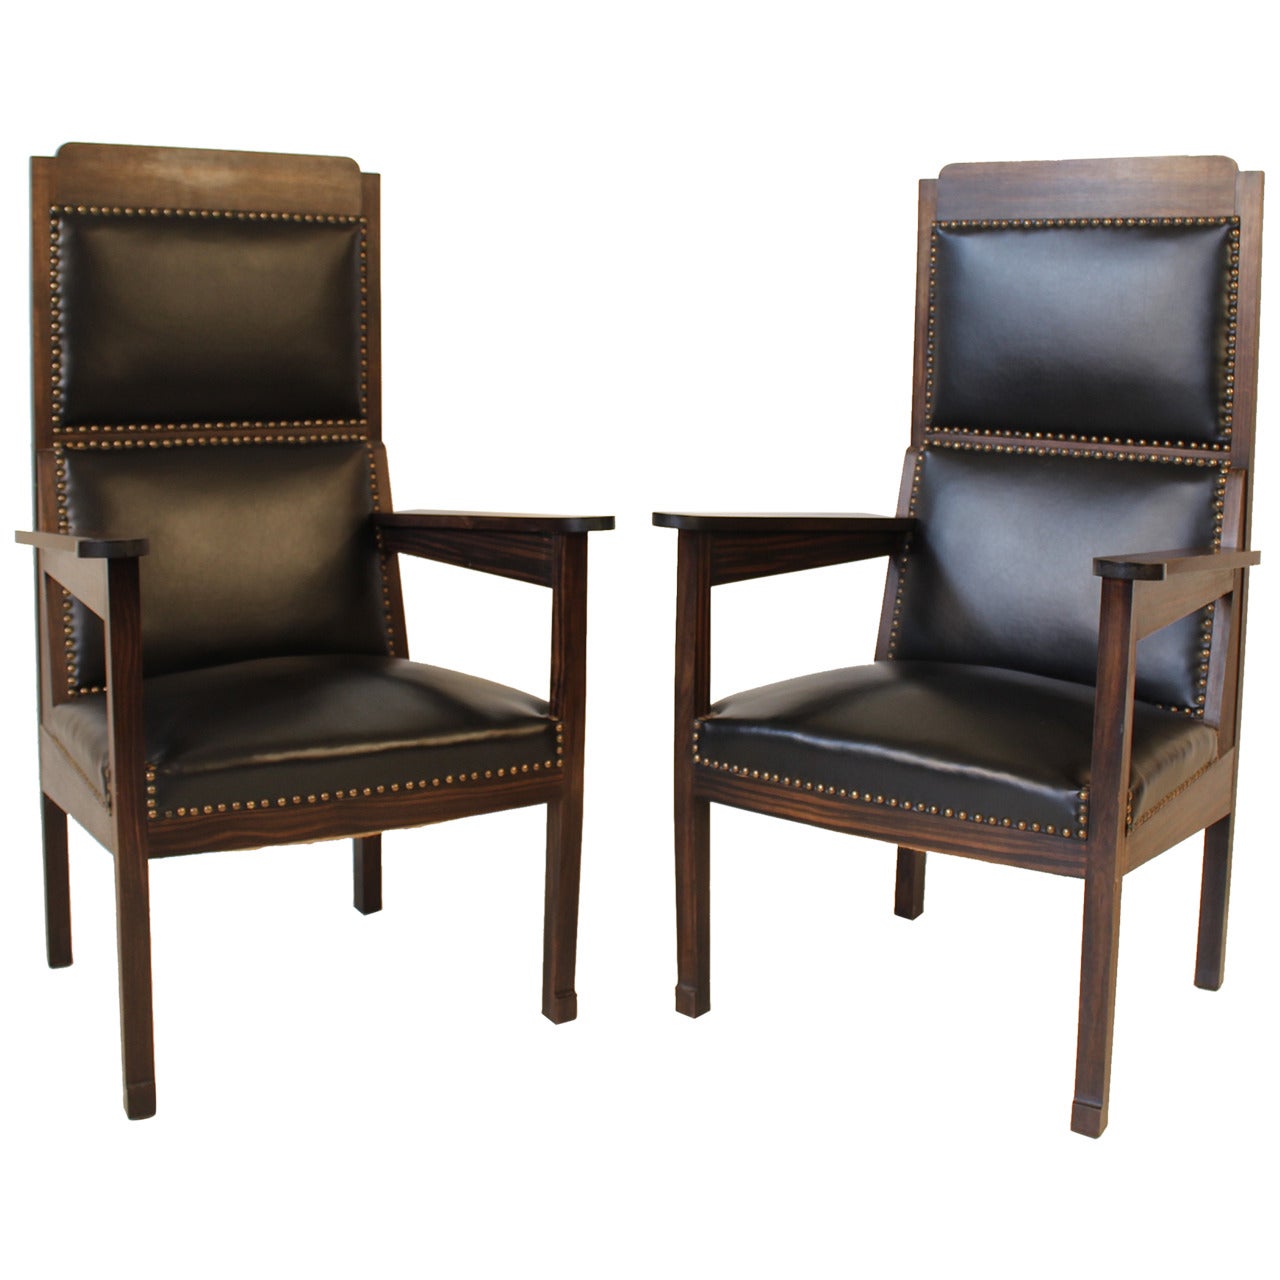 Rare Pair of Solid Macassar Ebony Arts & Crafts Armchairs by H. P. Berlage